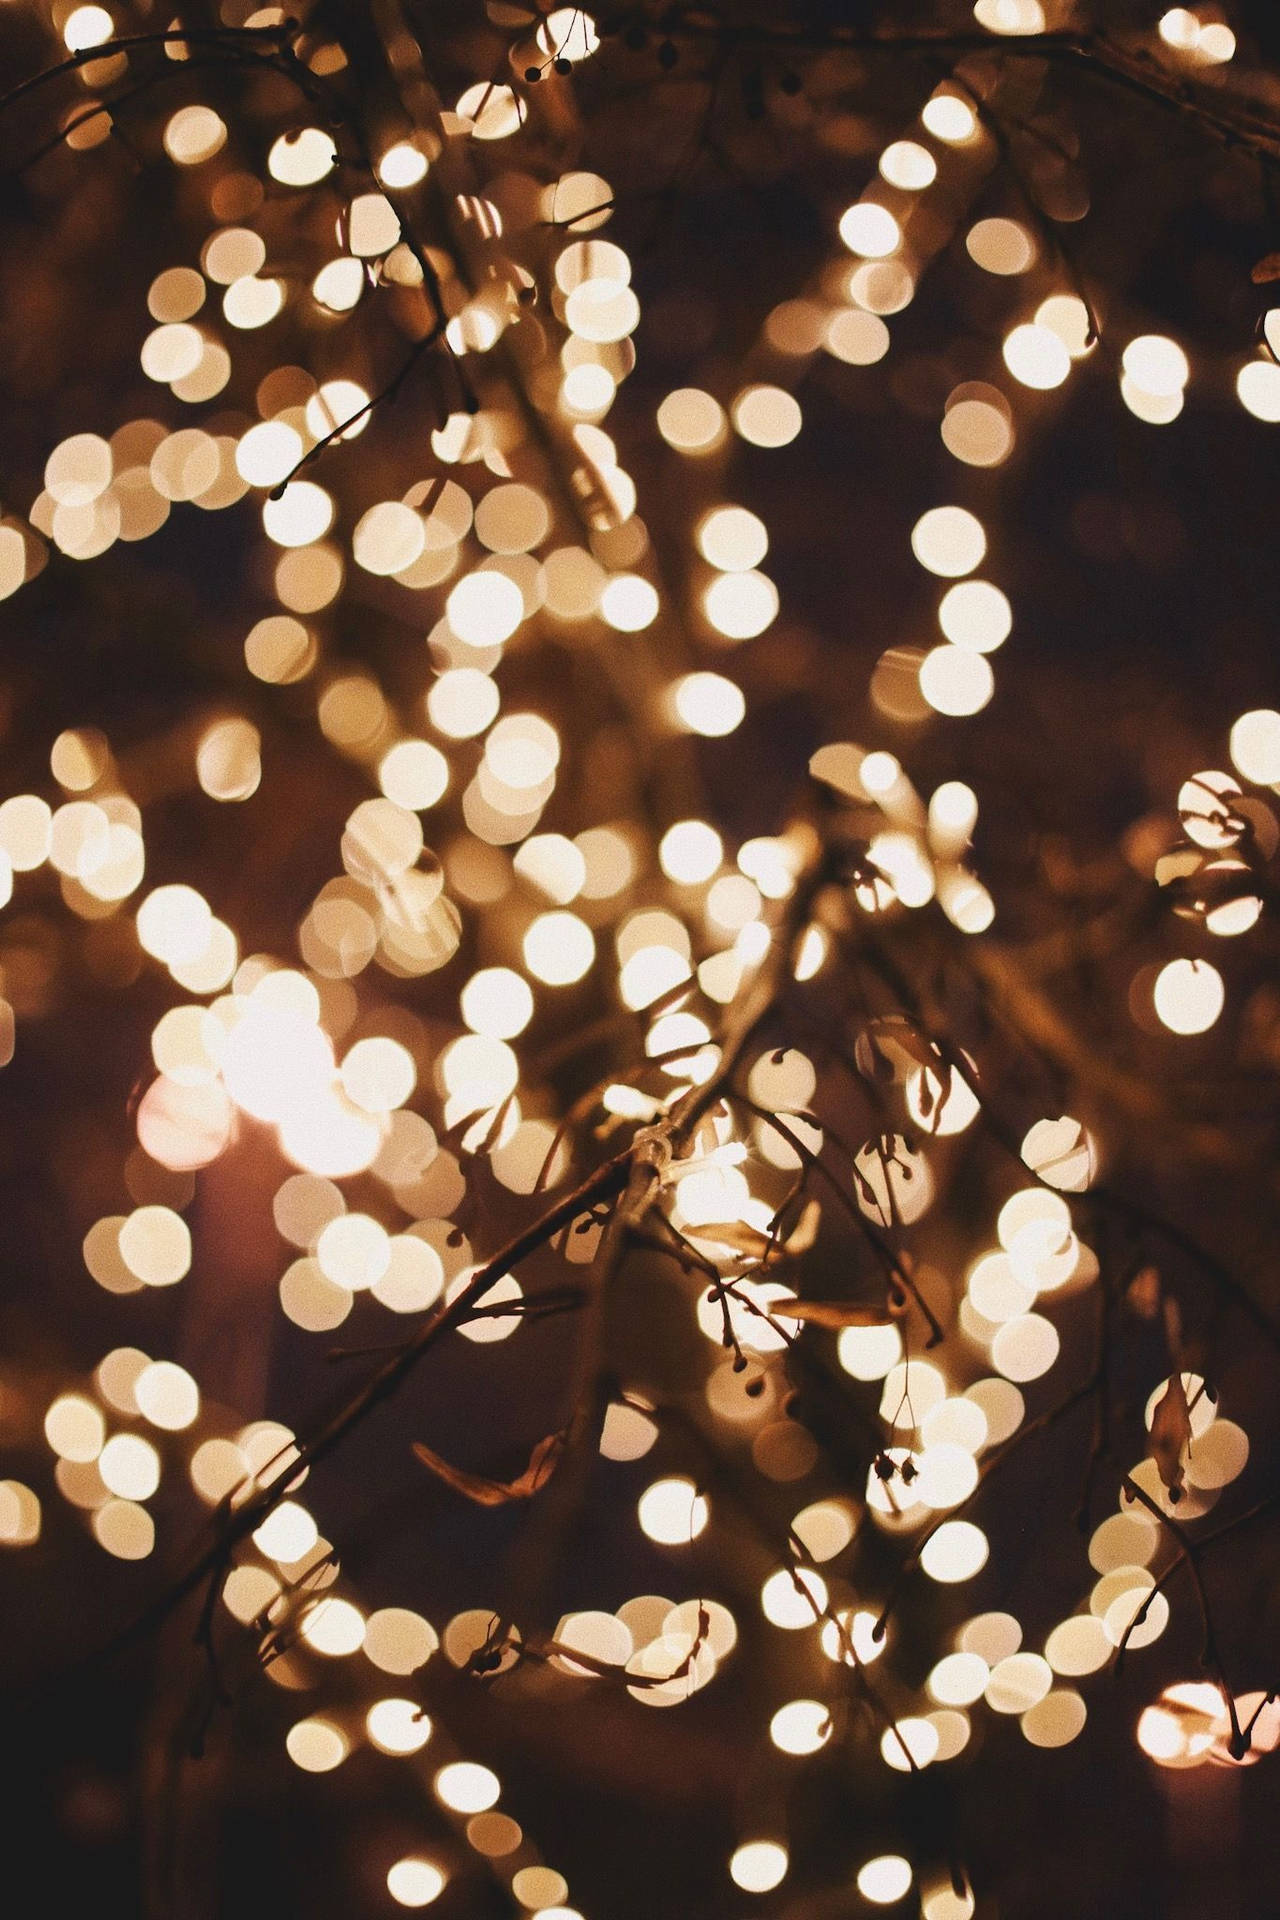 Make your holiday sparkle with beautiful Christmas lights! Wallpaper